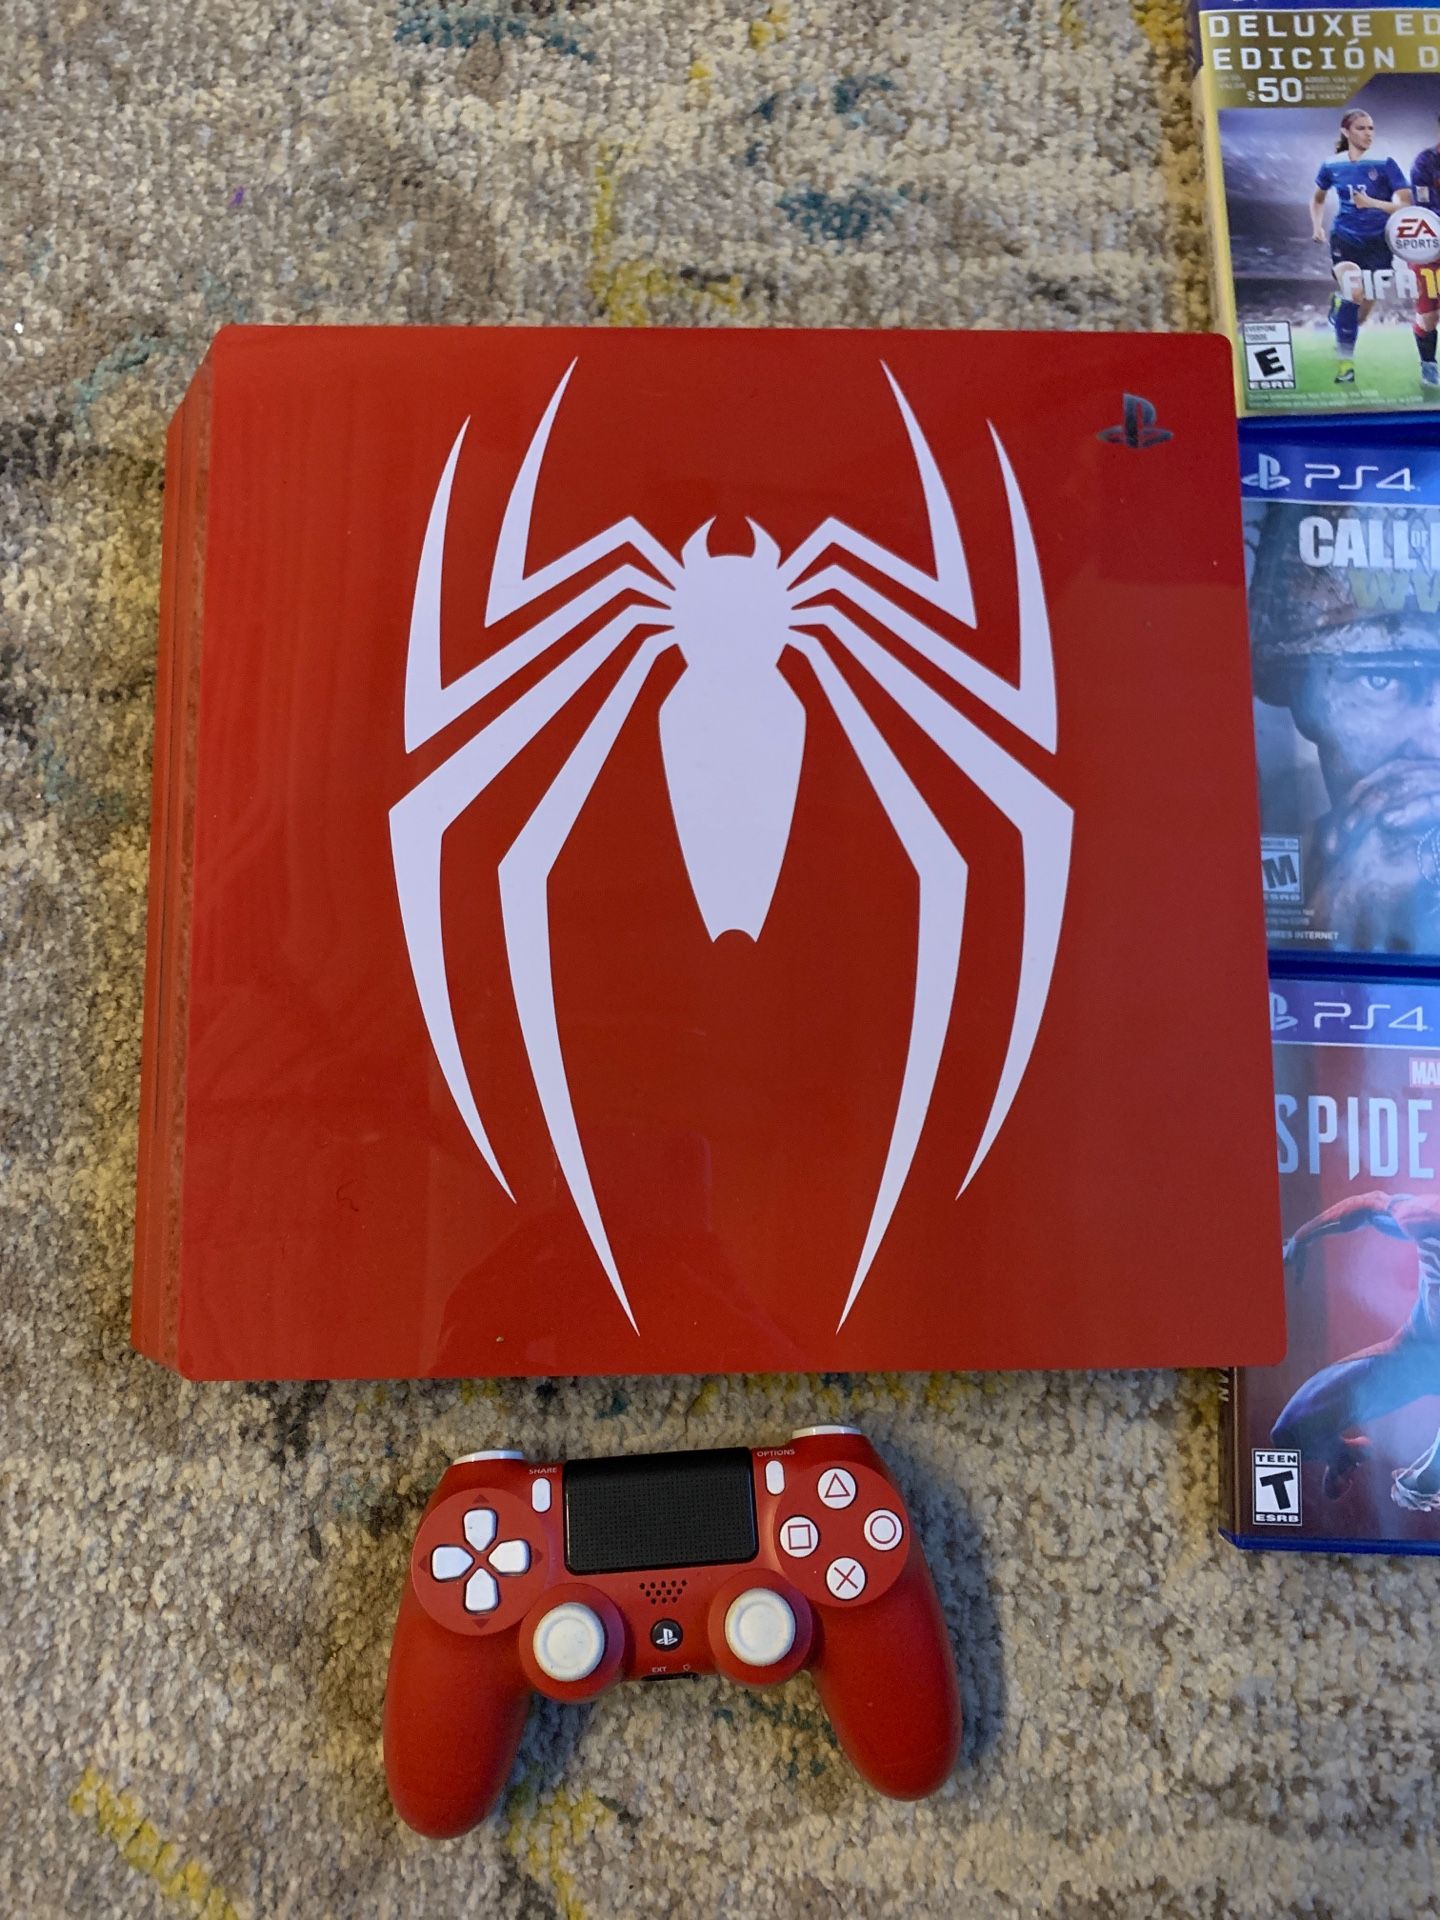 PS4 Spiderman Edition, all games included with red controller